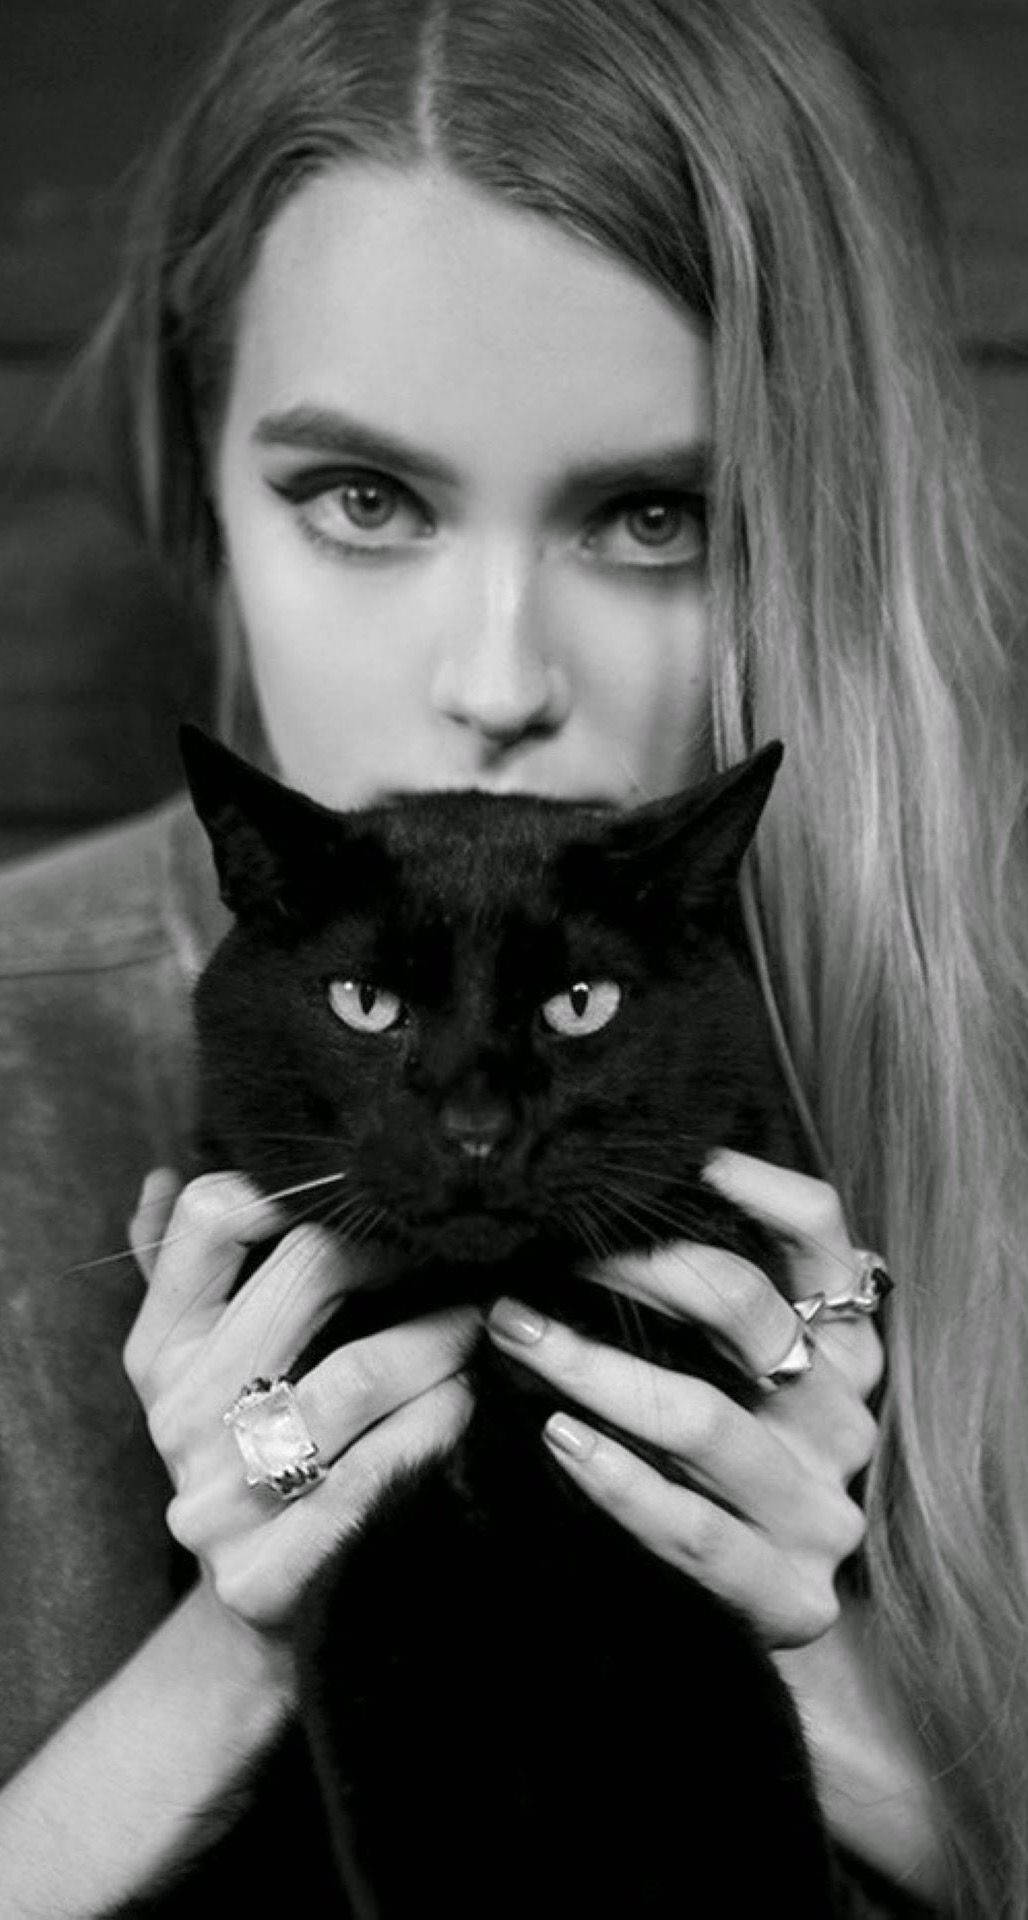 Girl With Black Cat iPhone Wallpaper